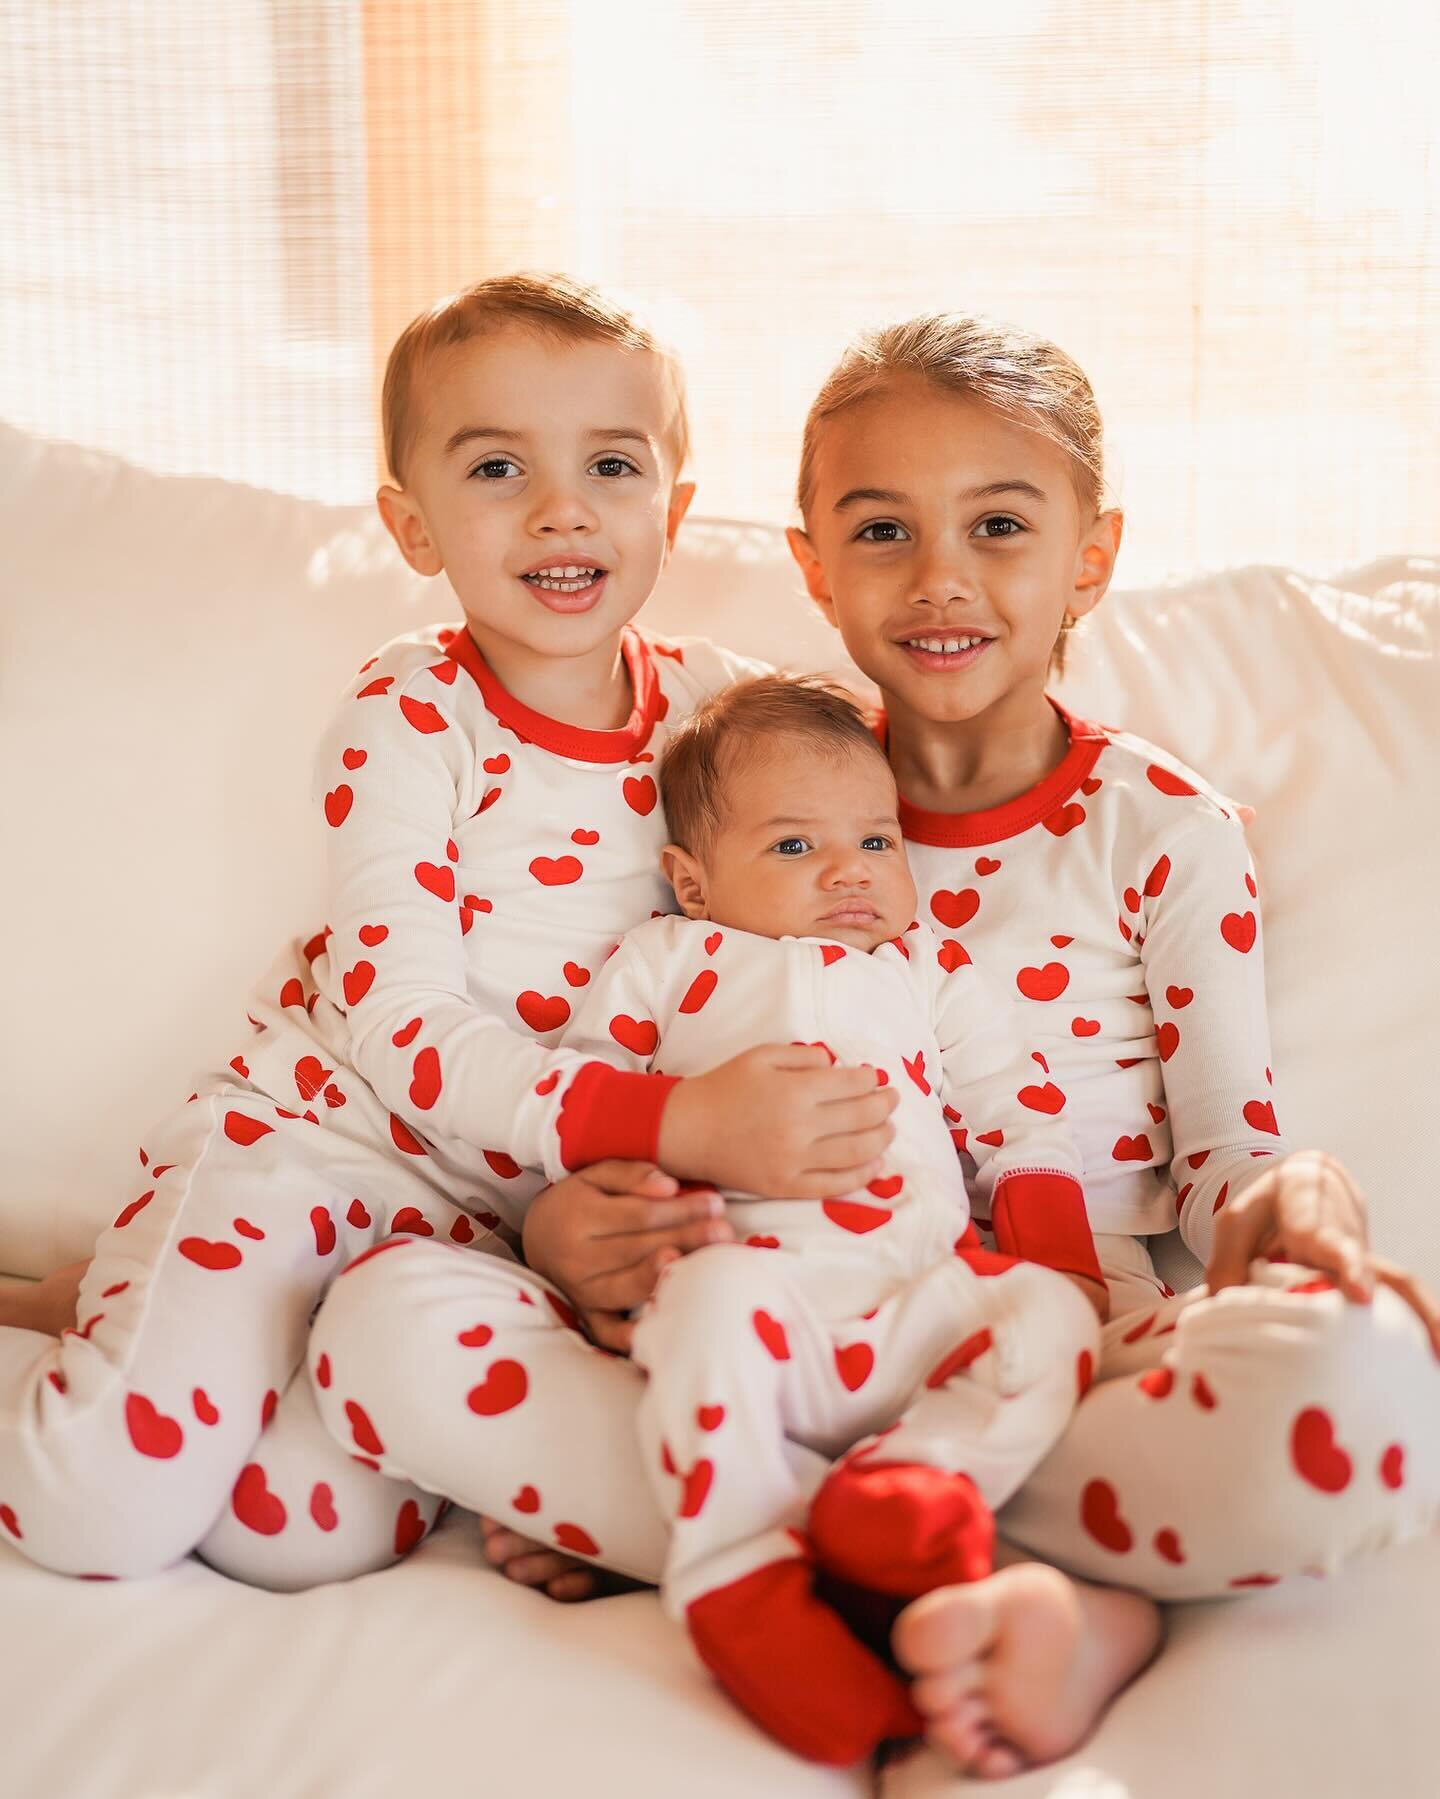 Perfect time to celebrate L❤️VE, in the sweetest matching @monicaandandy pajamas